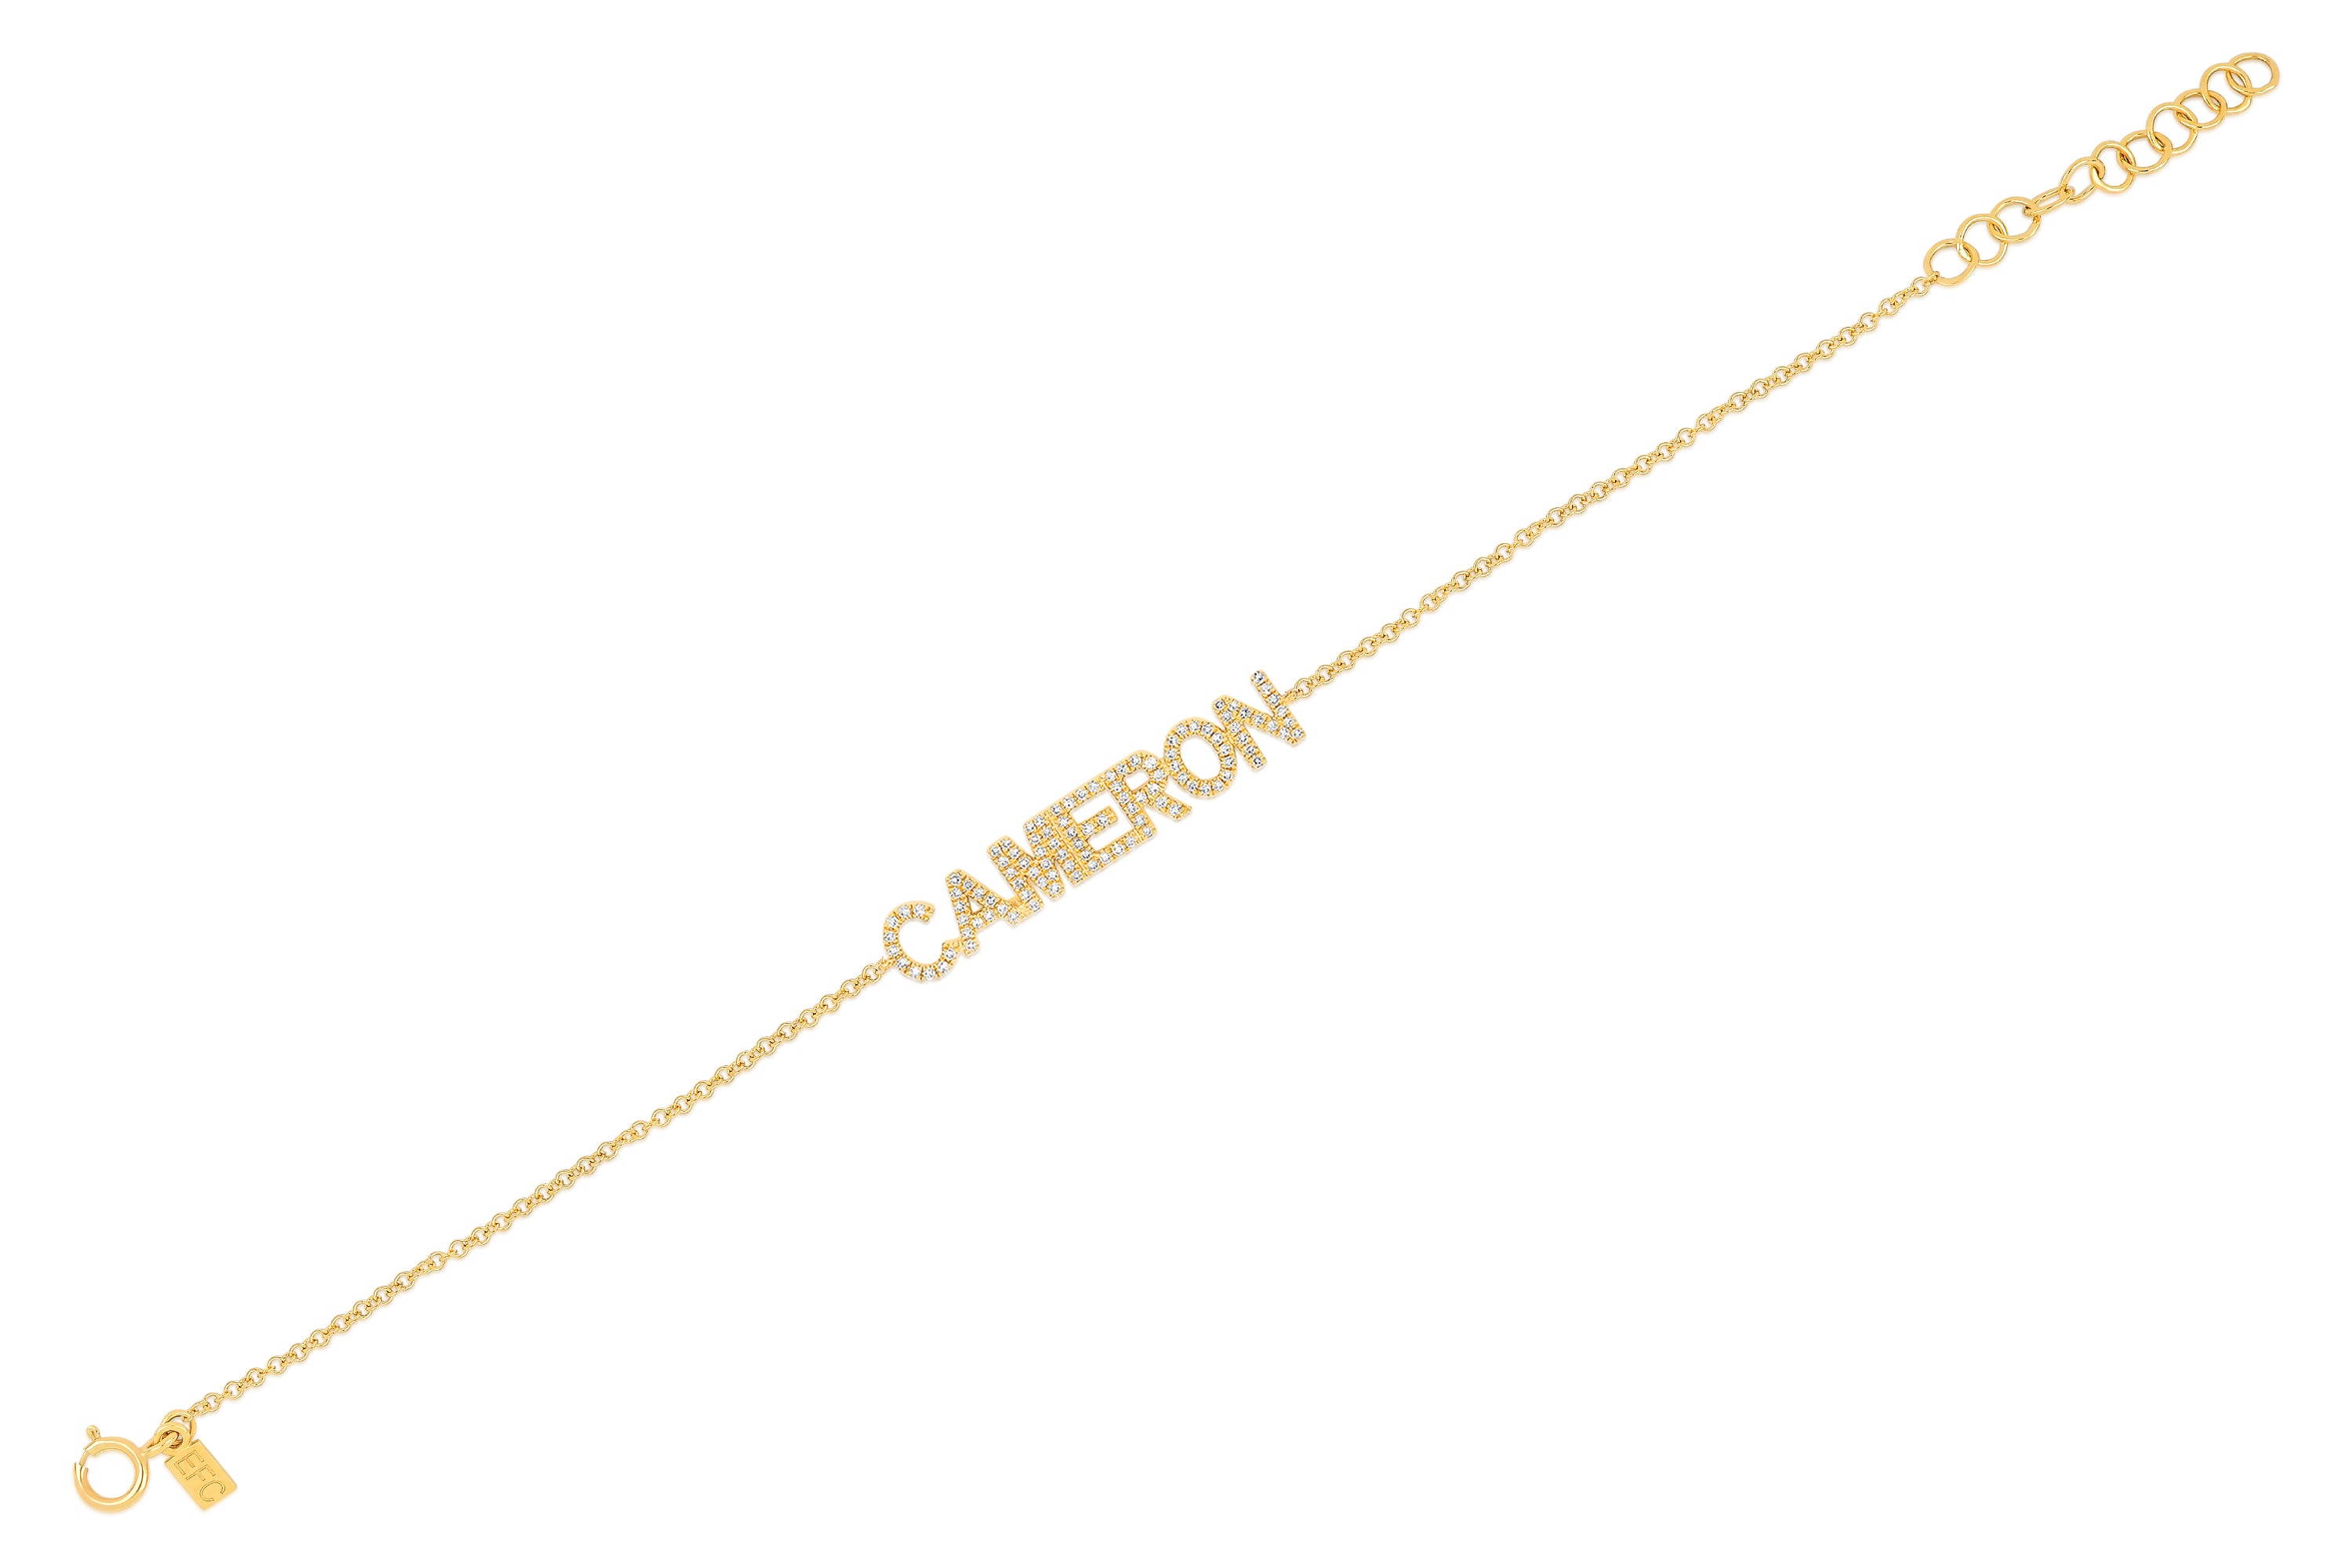 14k (karat) yellow gold diamond custom name bracelet with upper-case block letters chosen by you and set on a 14k (karat) yellow gold adjustable chain.